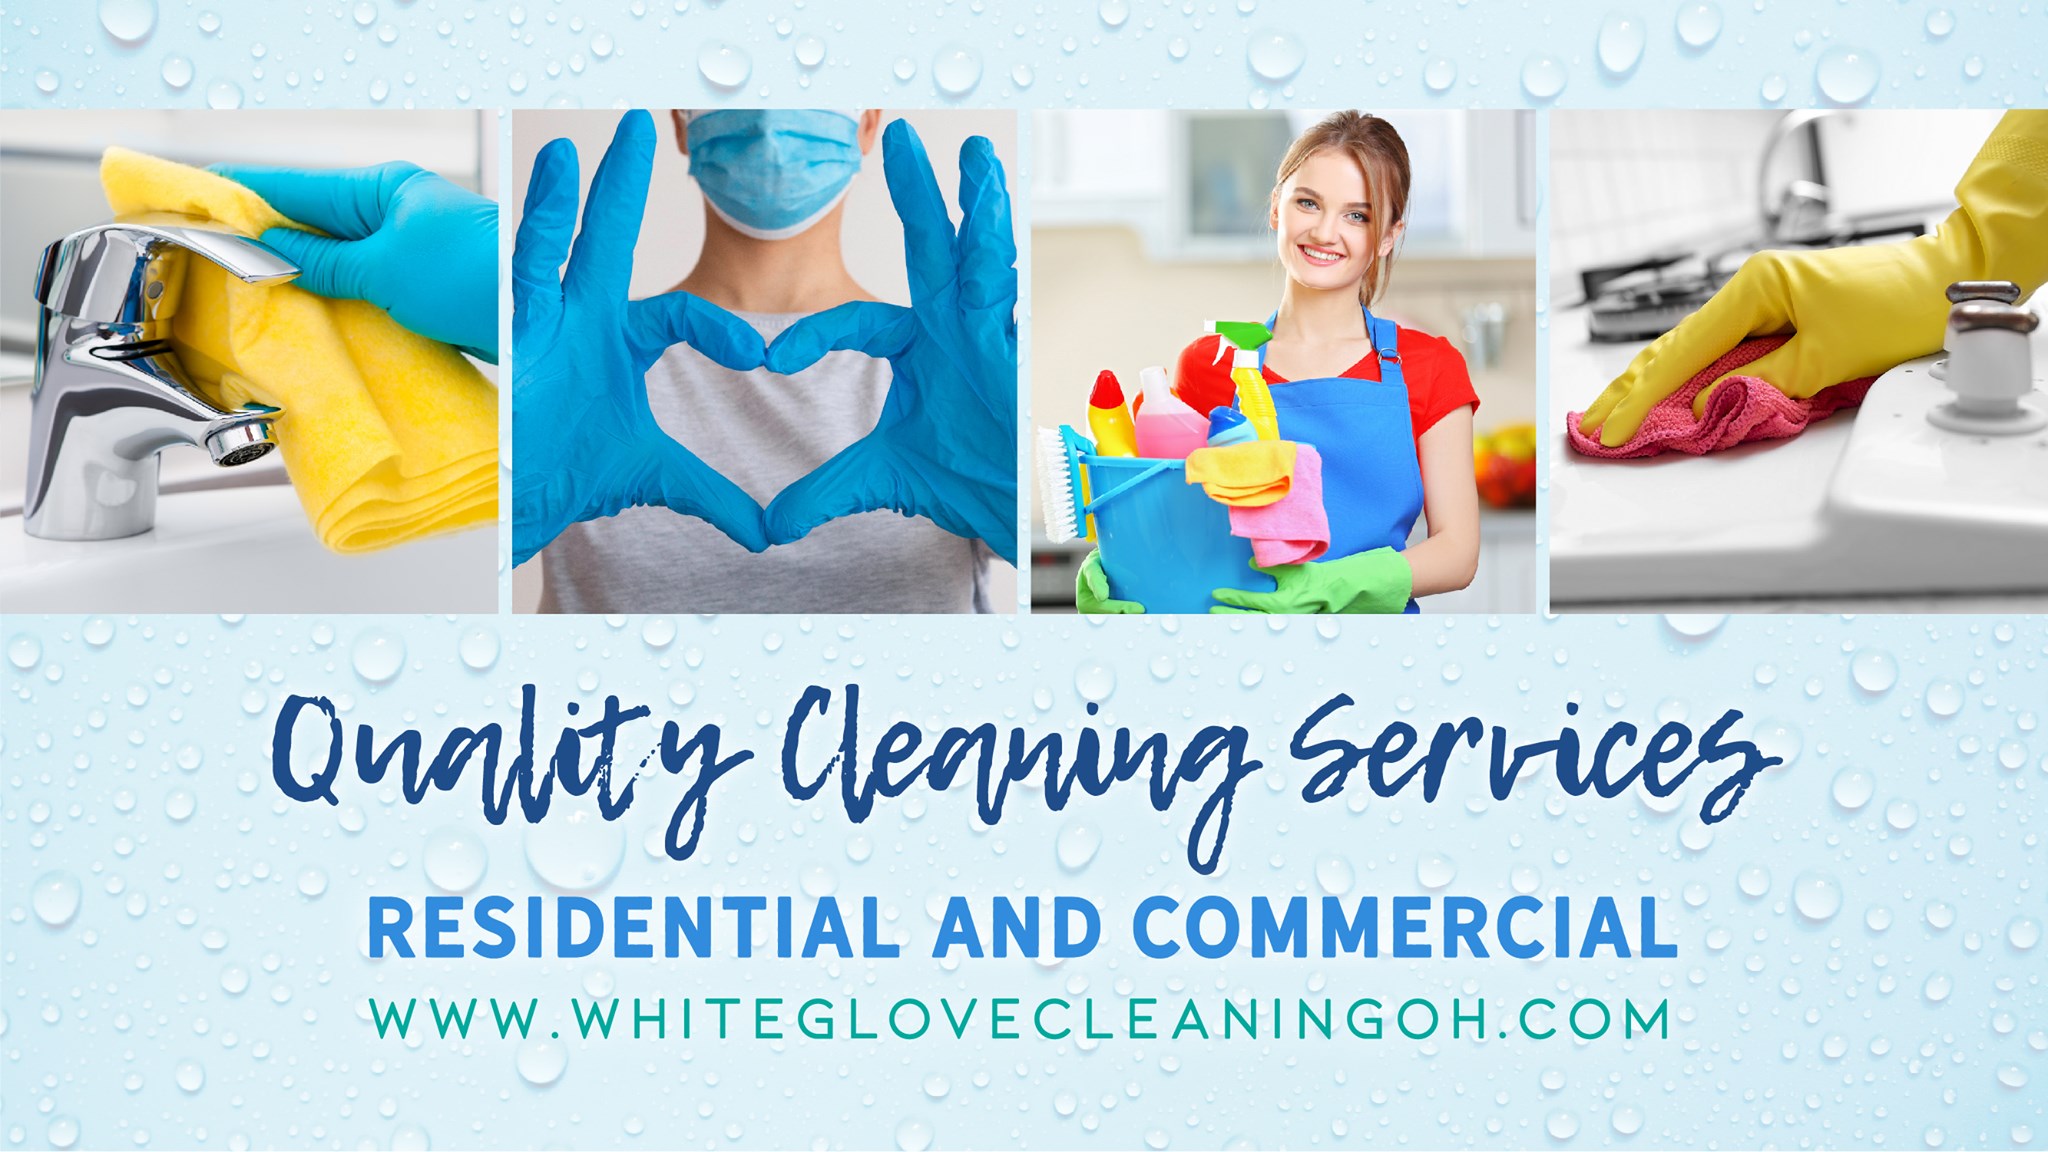 White Glove Cleaning Service